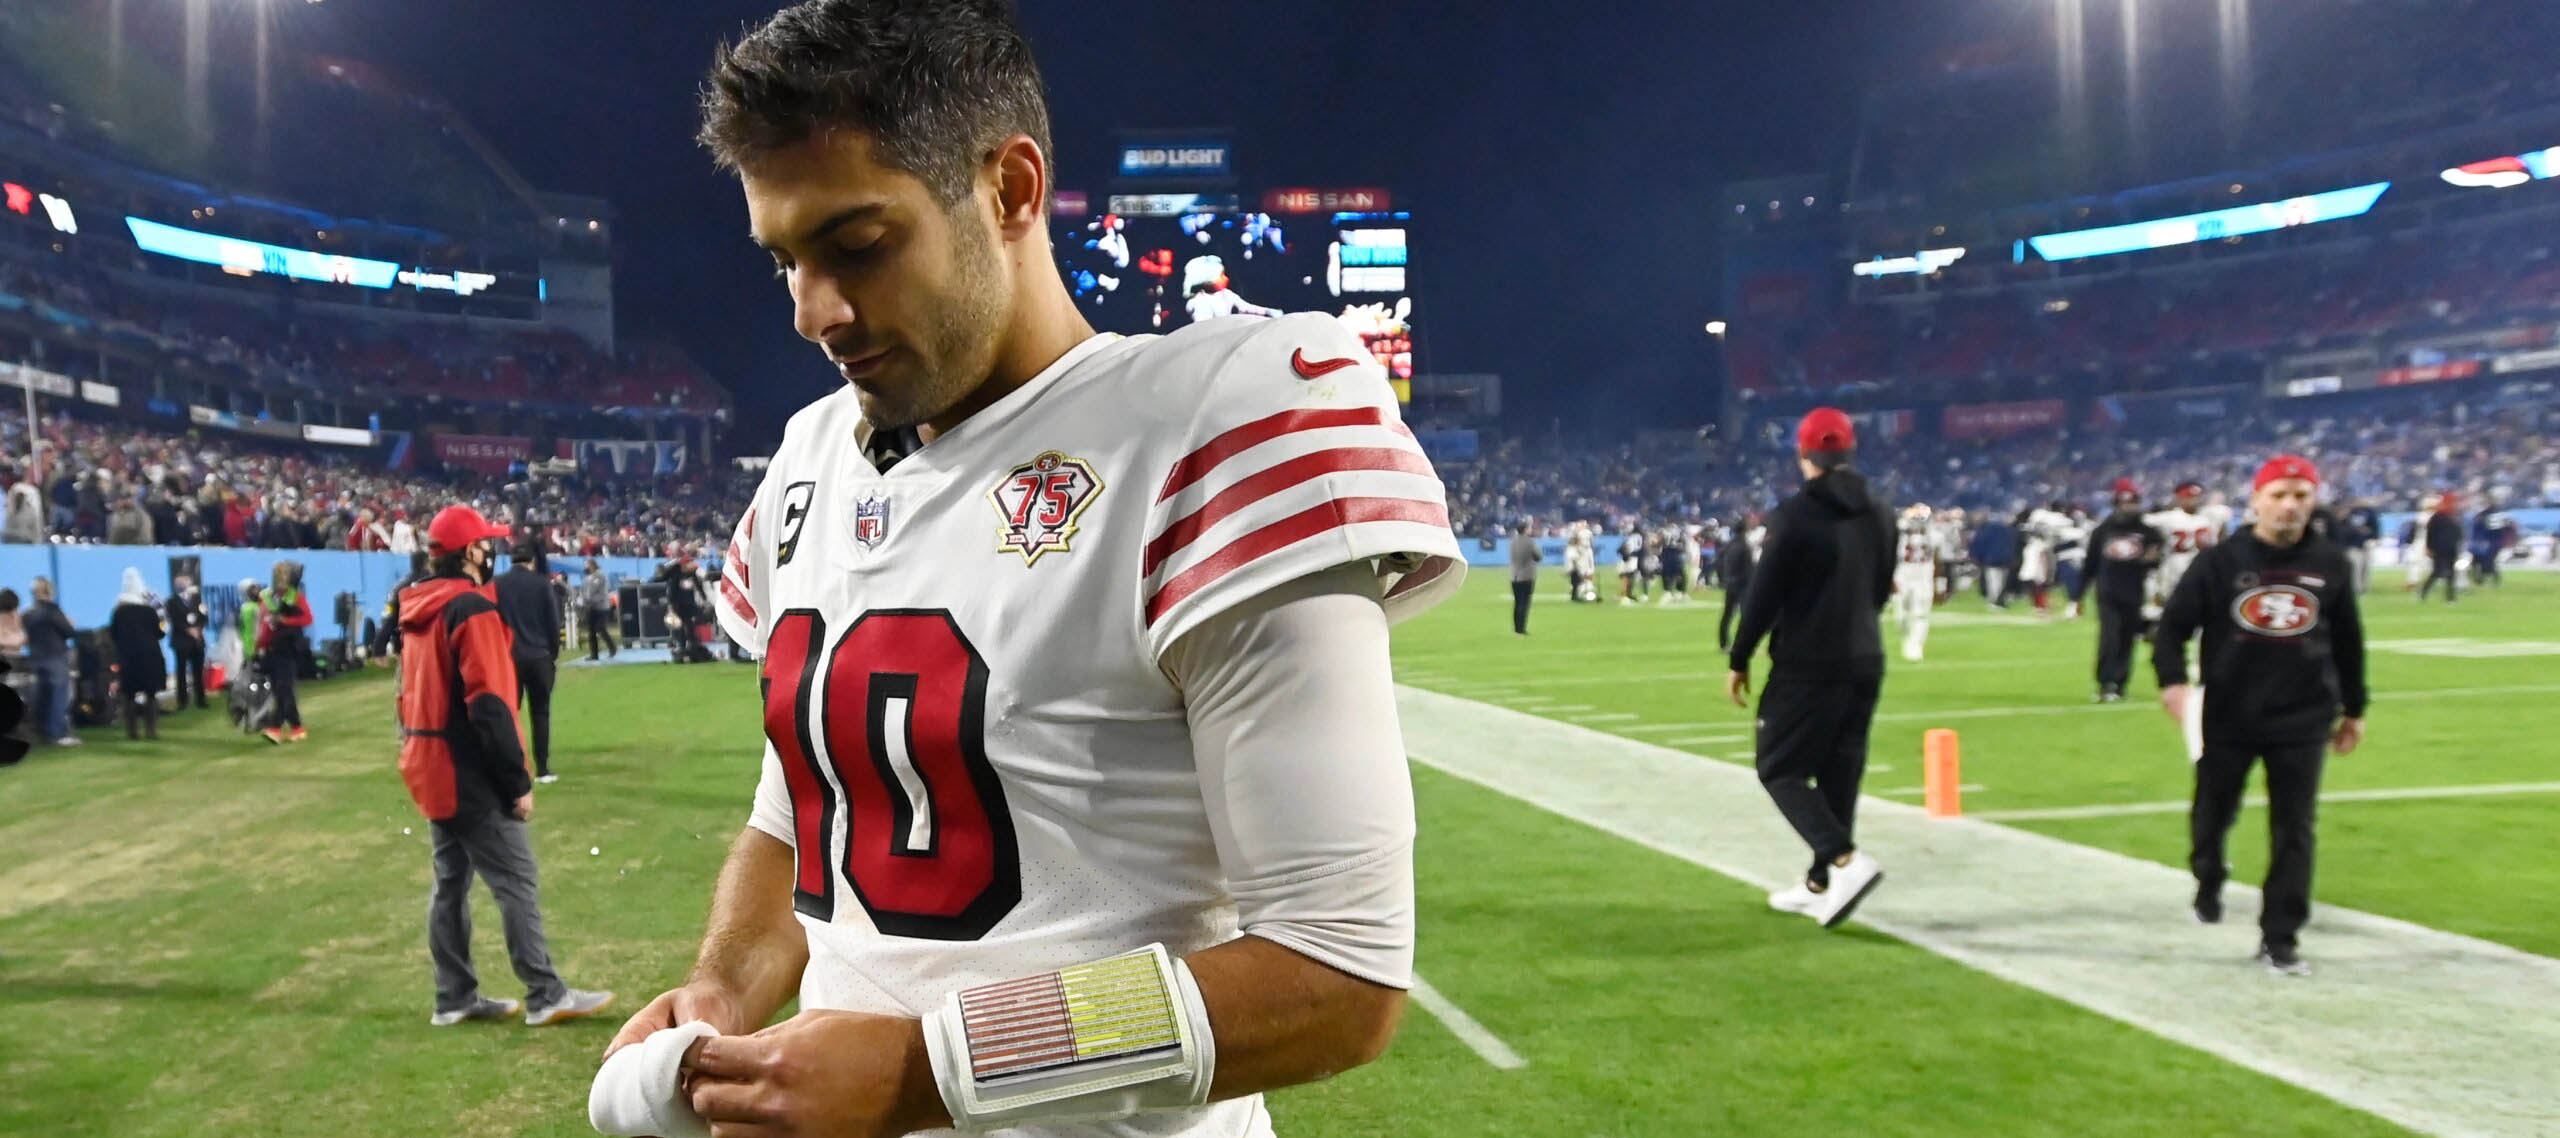 NFL Betting Rumors, Trades & News 49ers Could Cut Jimmy G, Sean Payton May or May Not Return